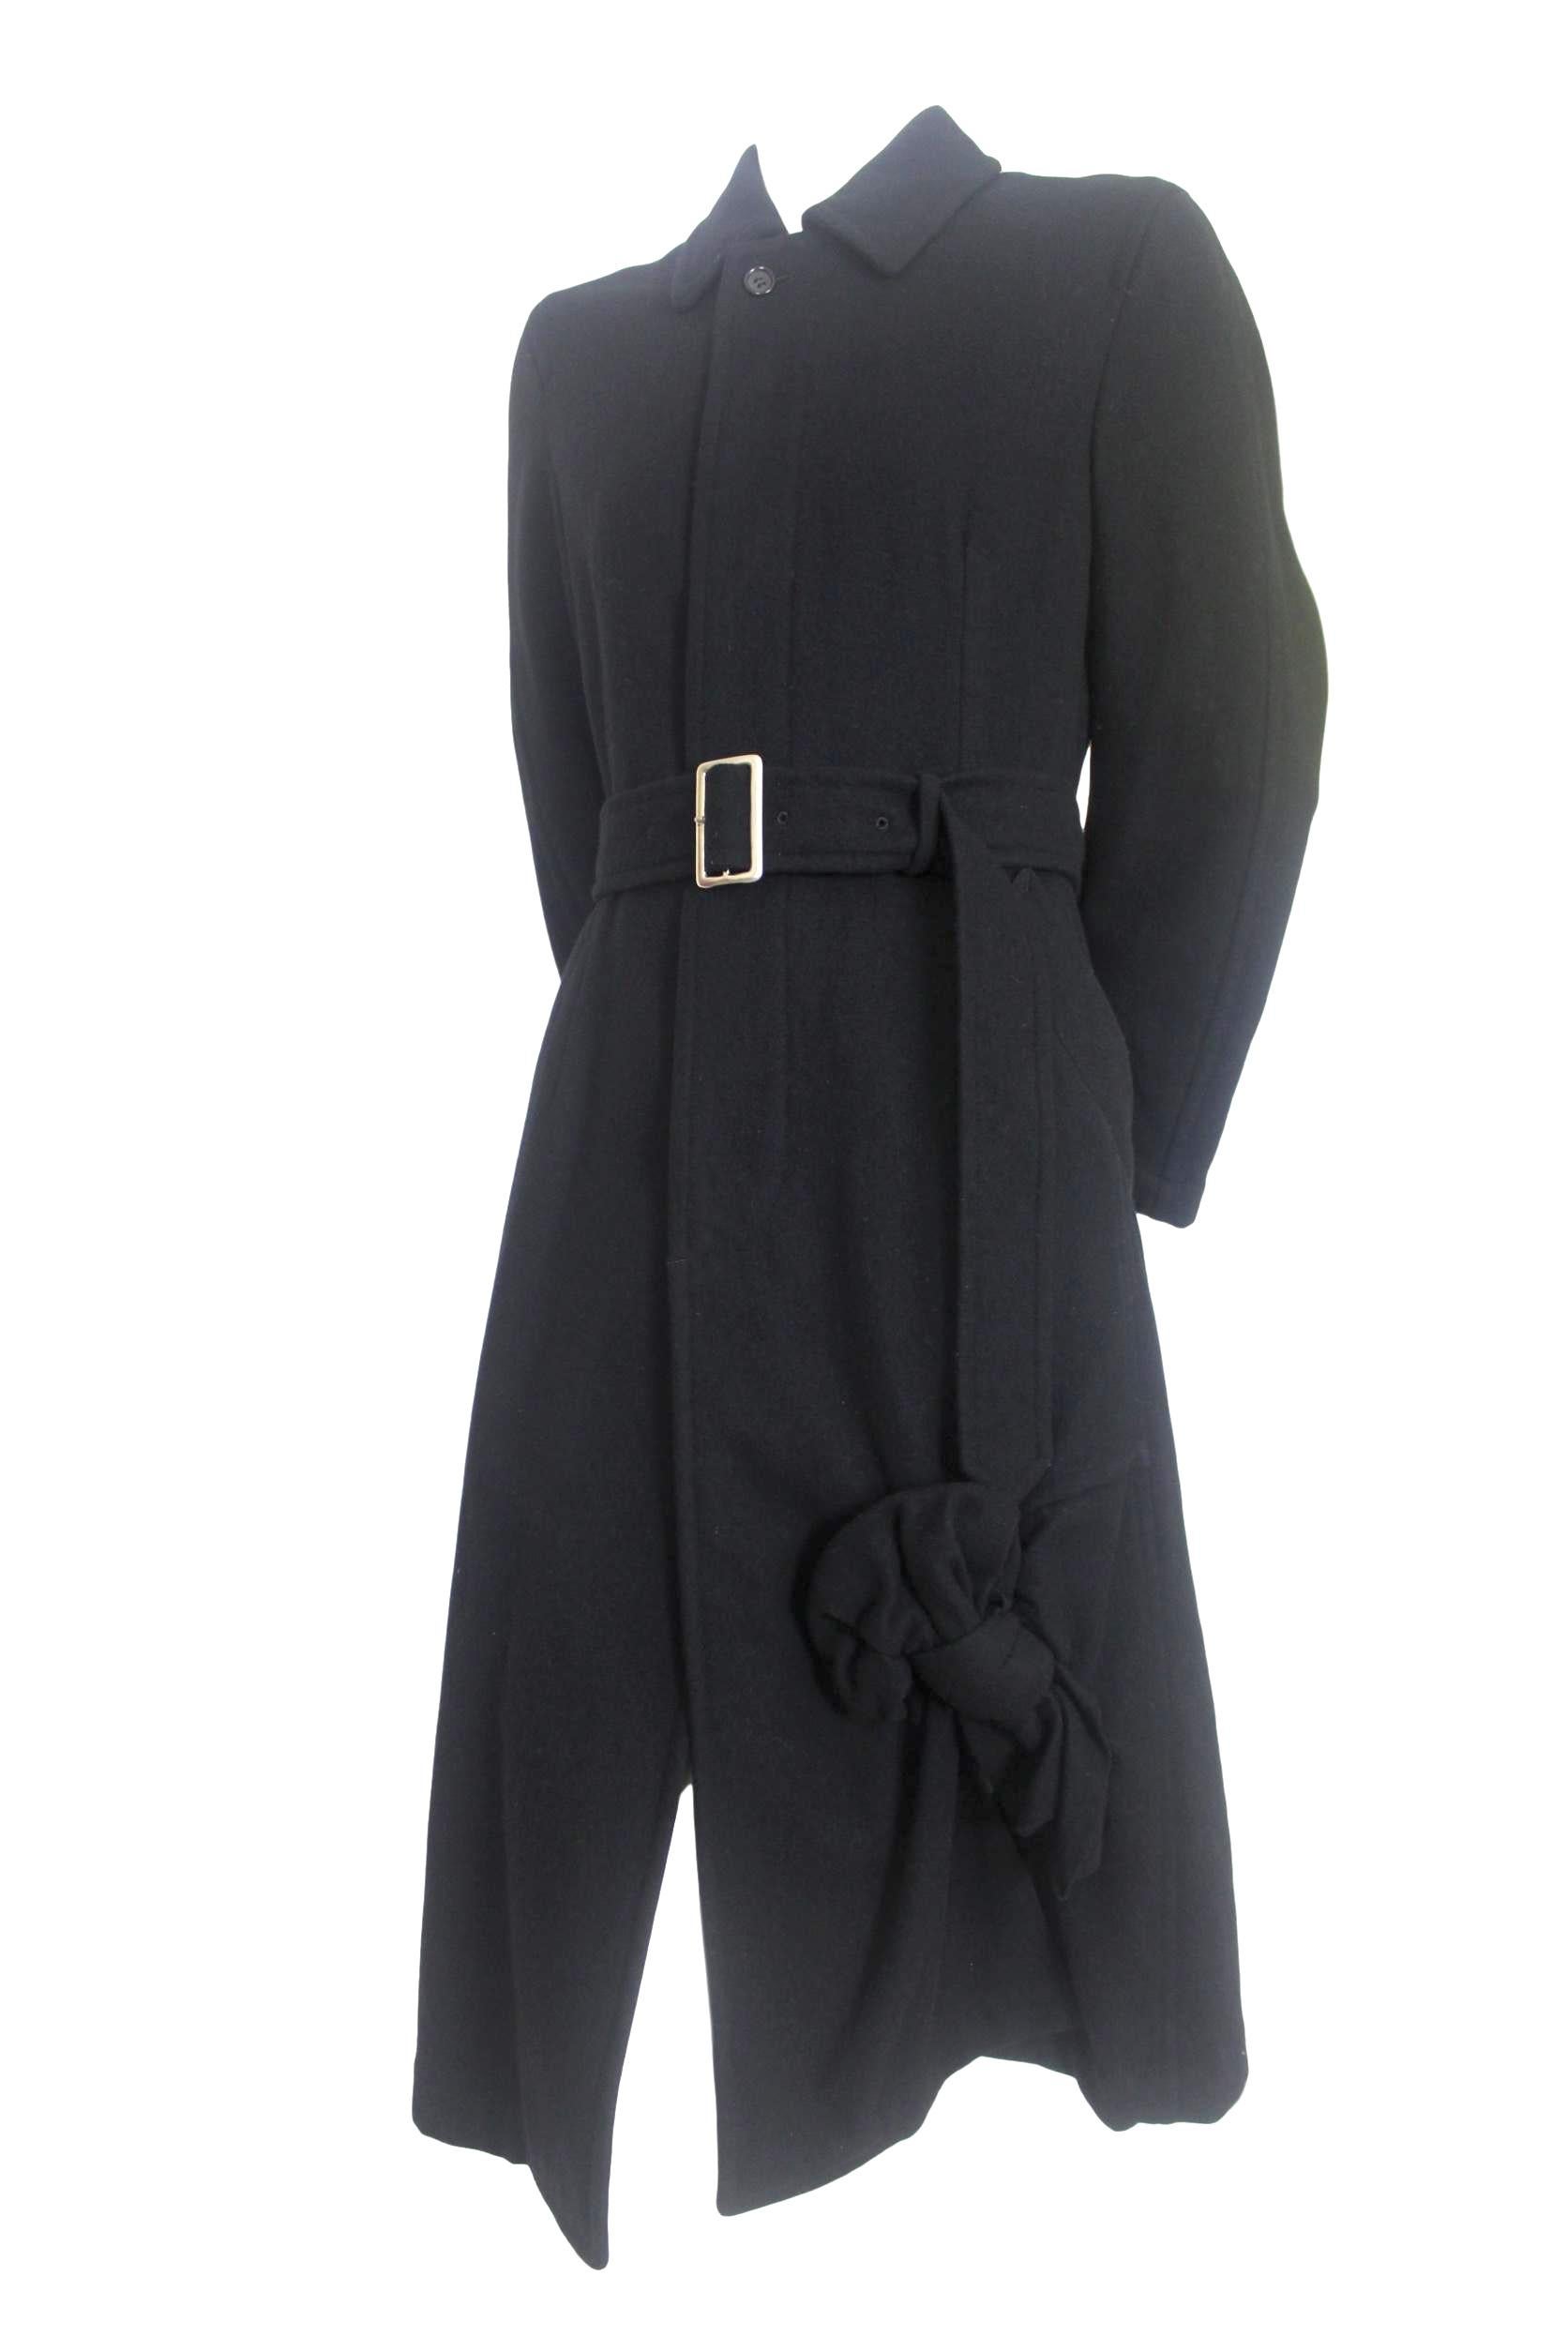 Comme des Garcons 2006 Collection
Wool Coat with Twisted Bow Decoration
Labelled size S